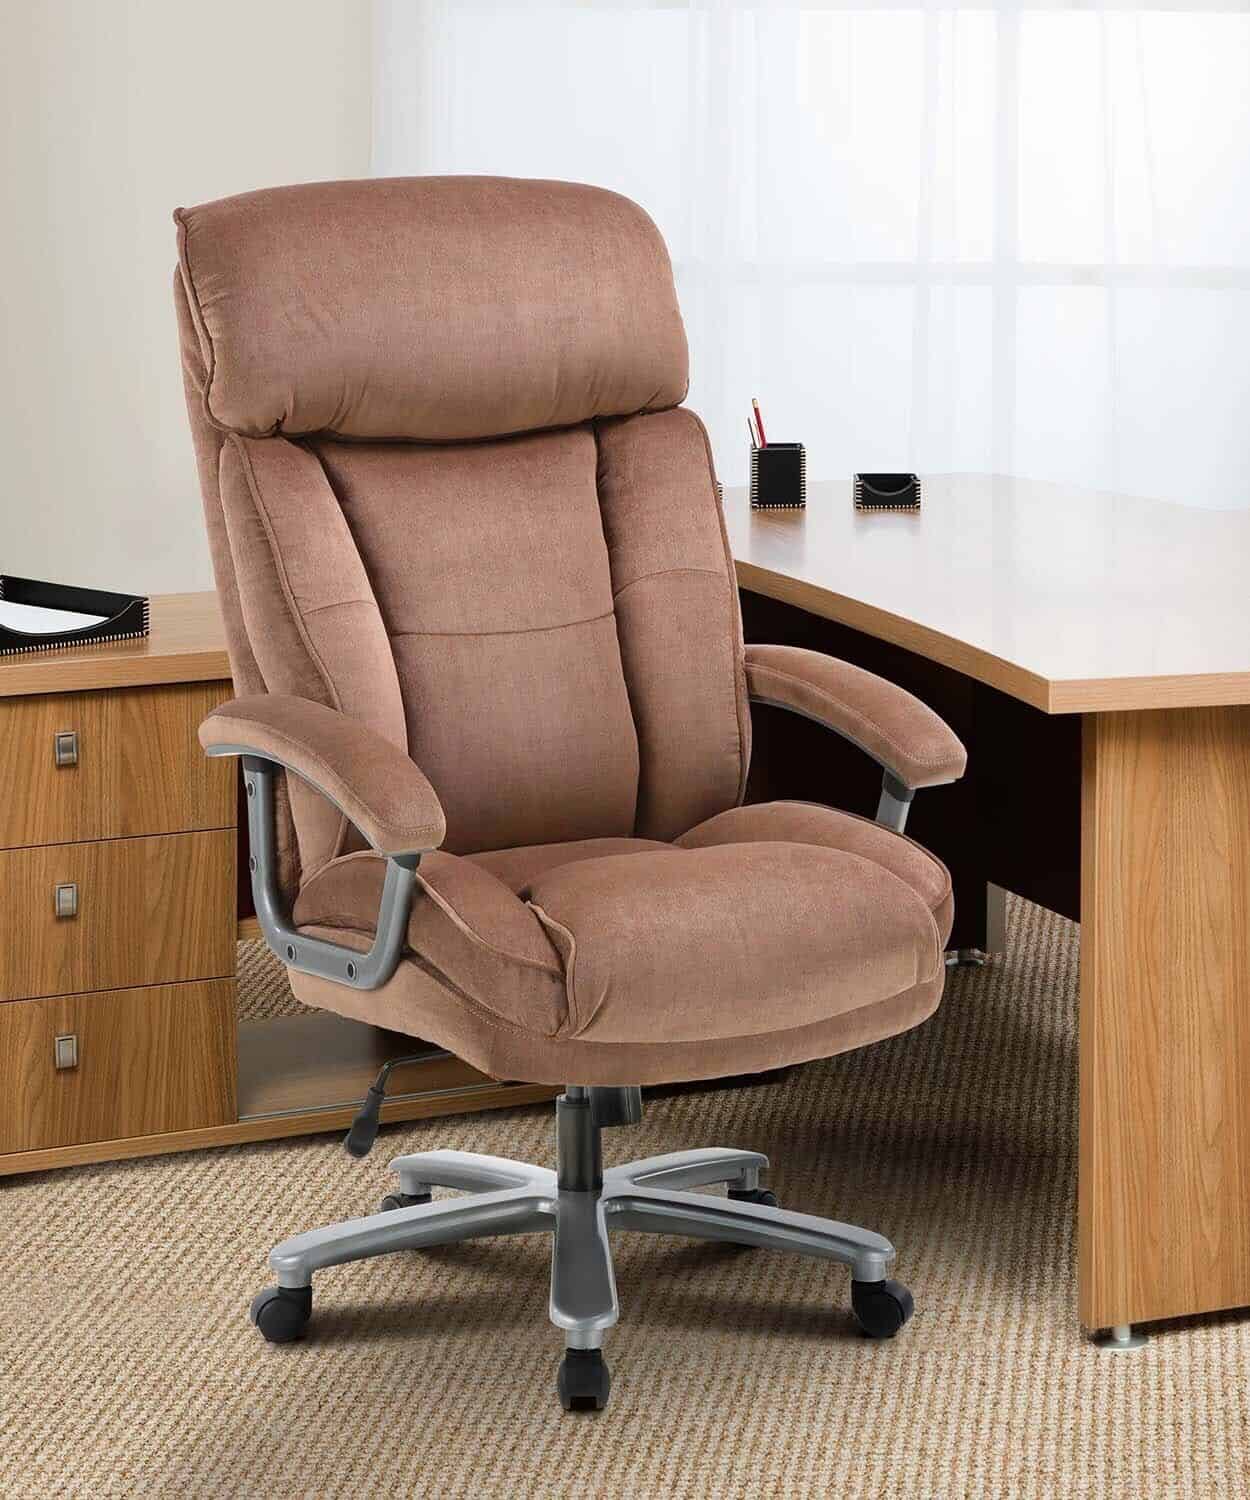 A brown office chair in front of a desk.